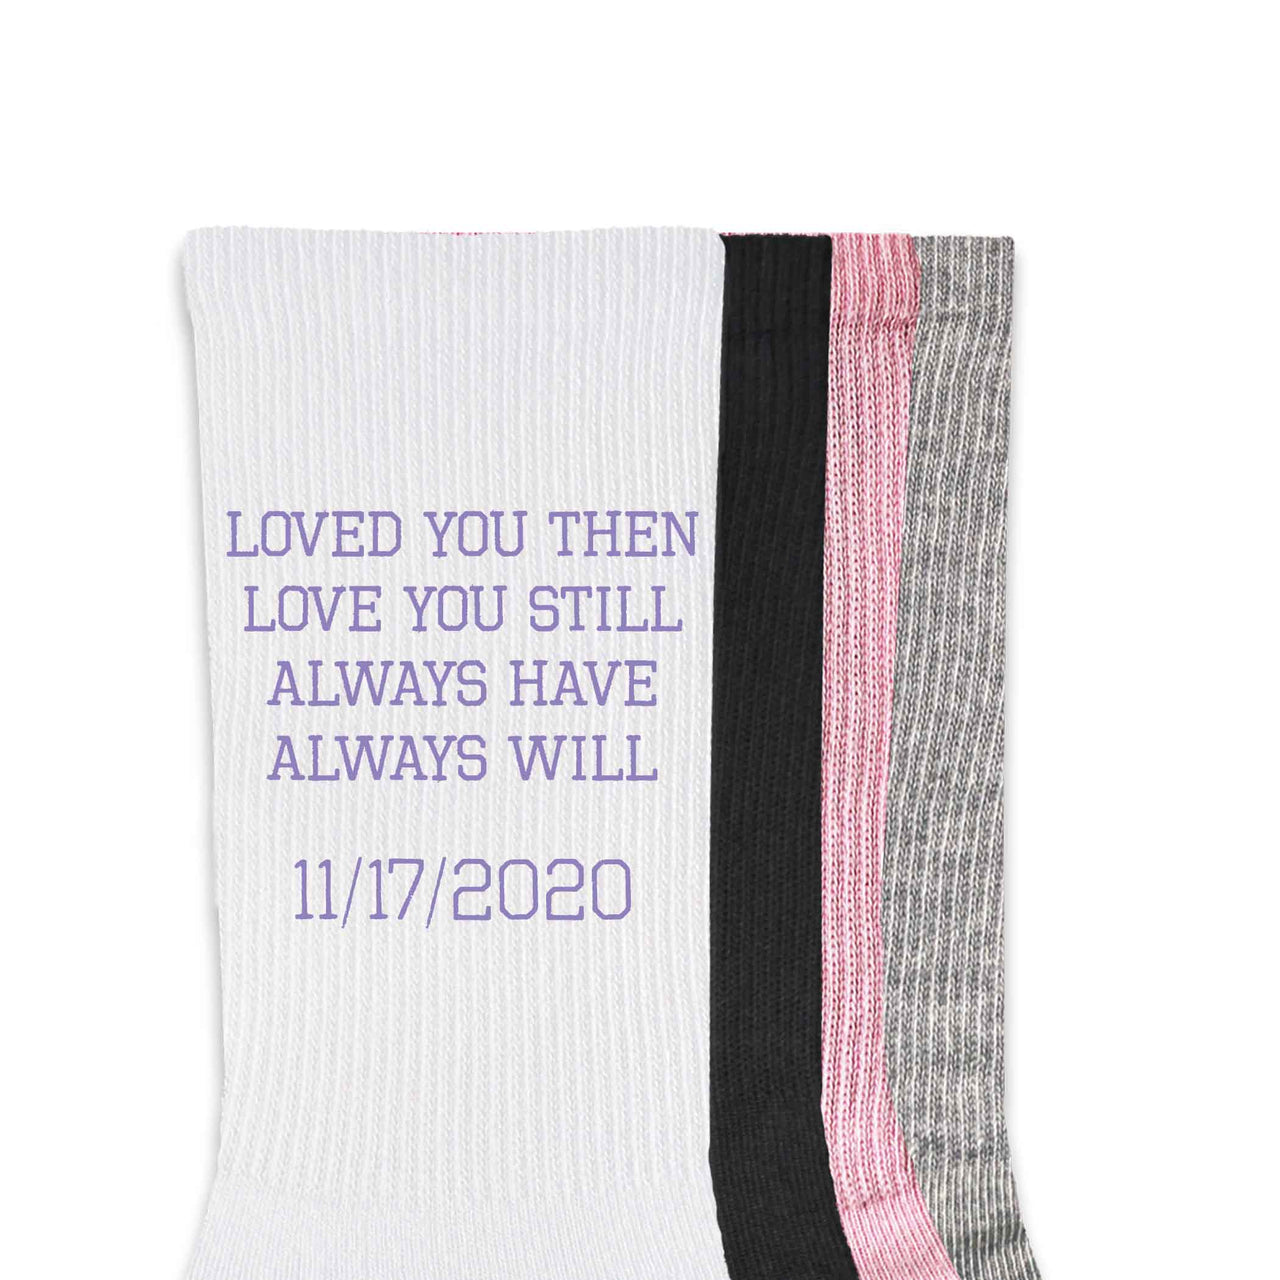 Personalized two year anniversary socks custom printed with loved you then loved you still always have always will and your wedding date.